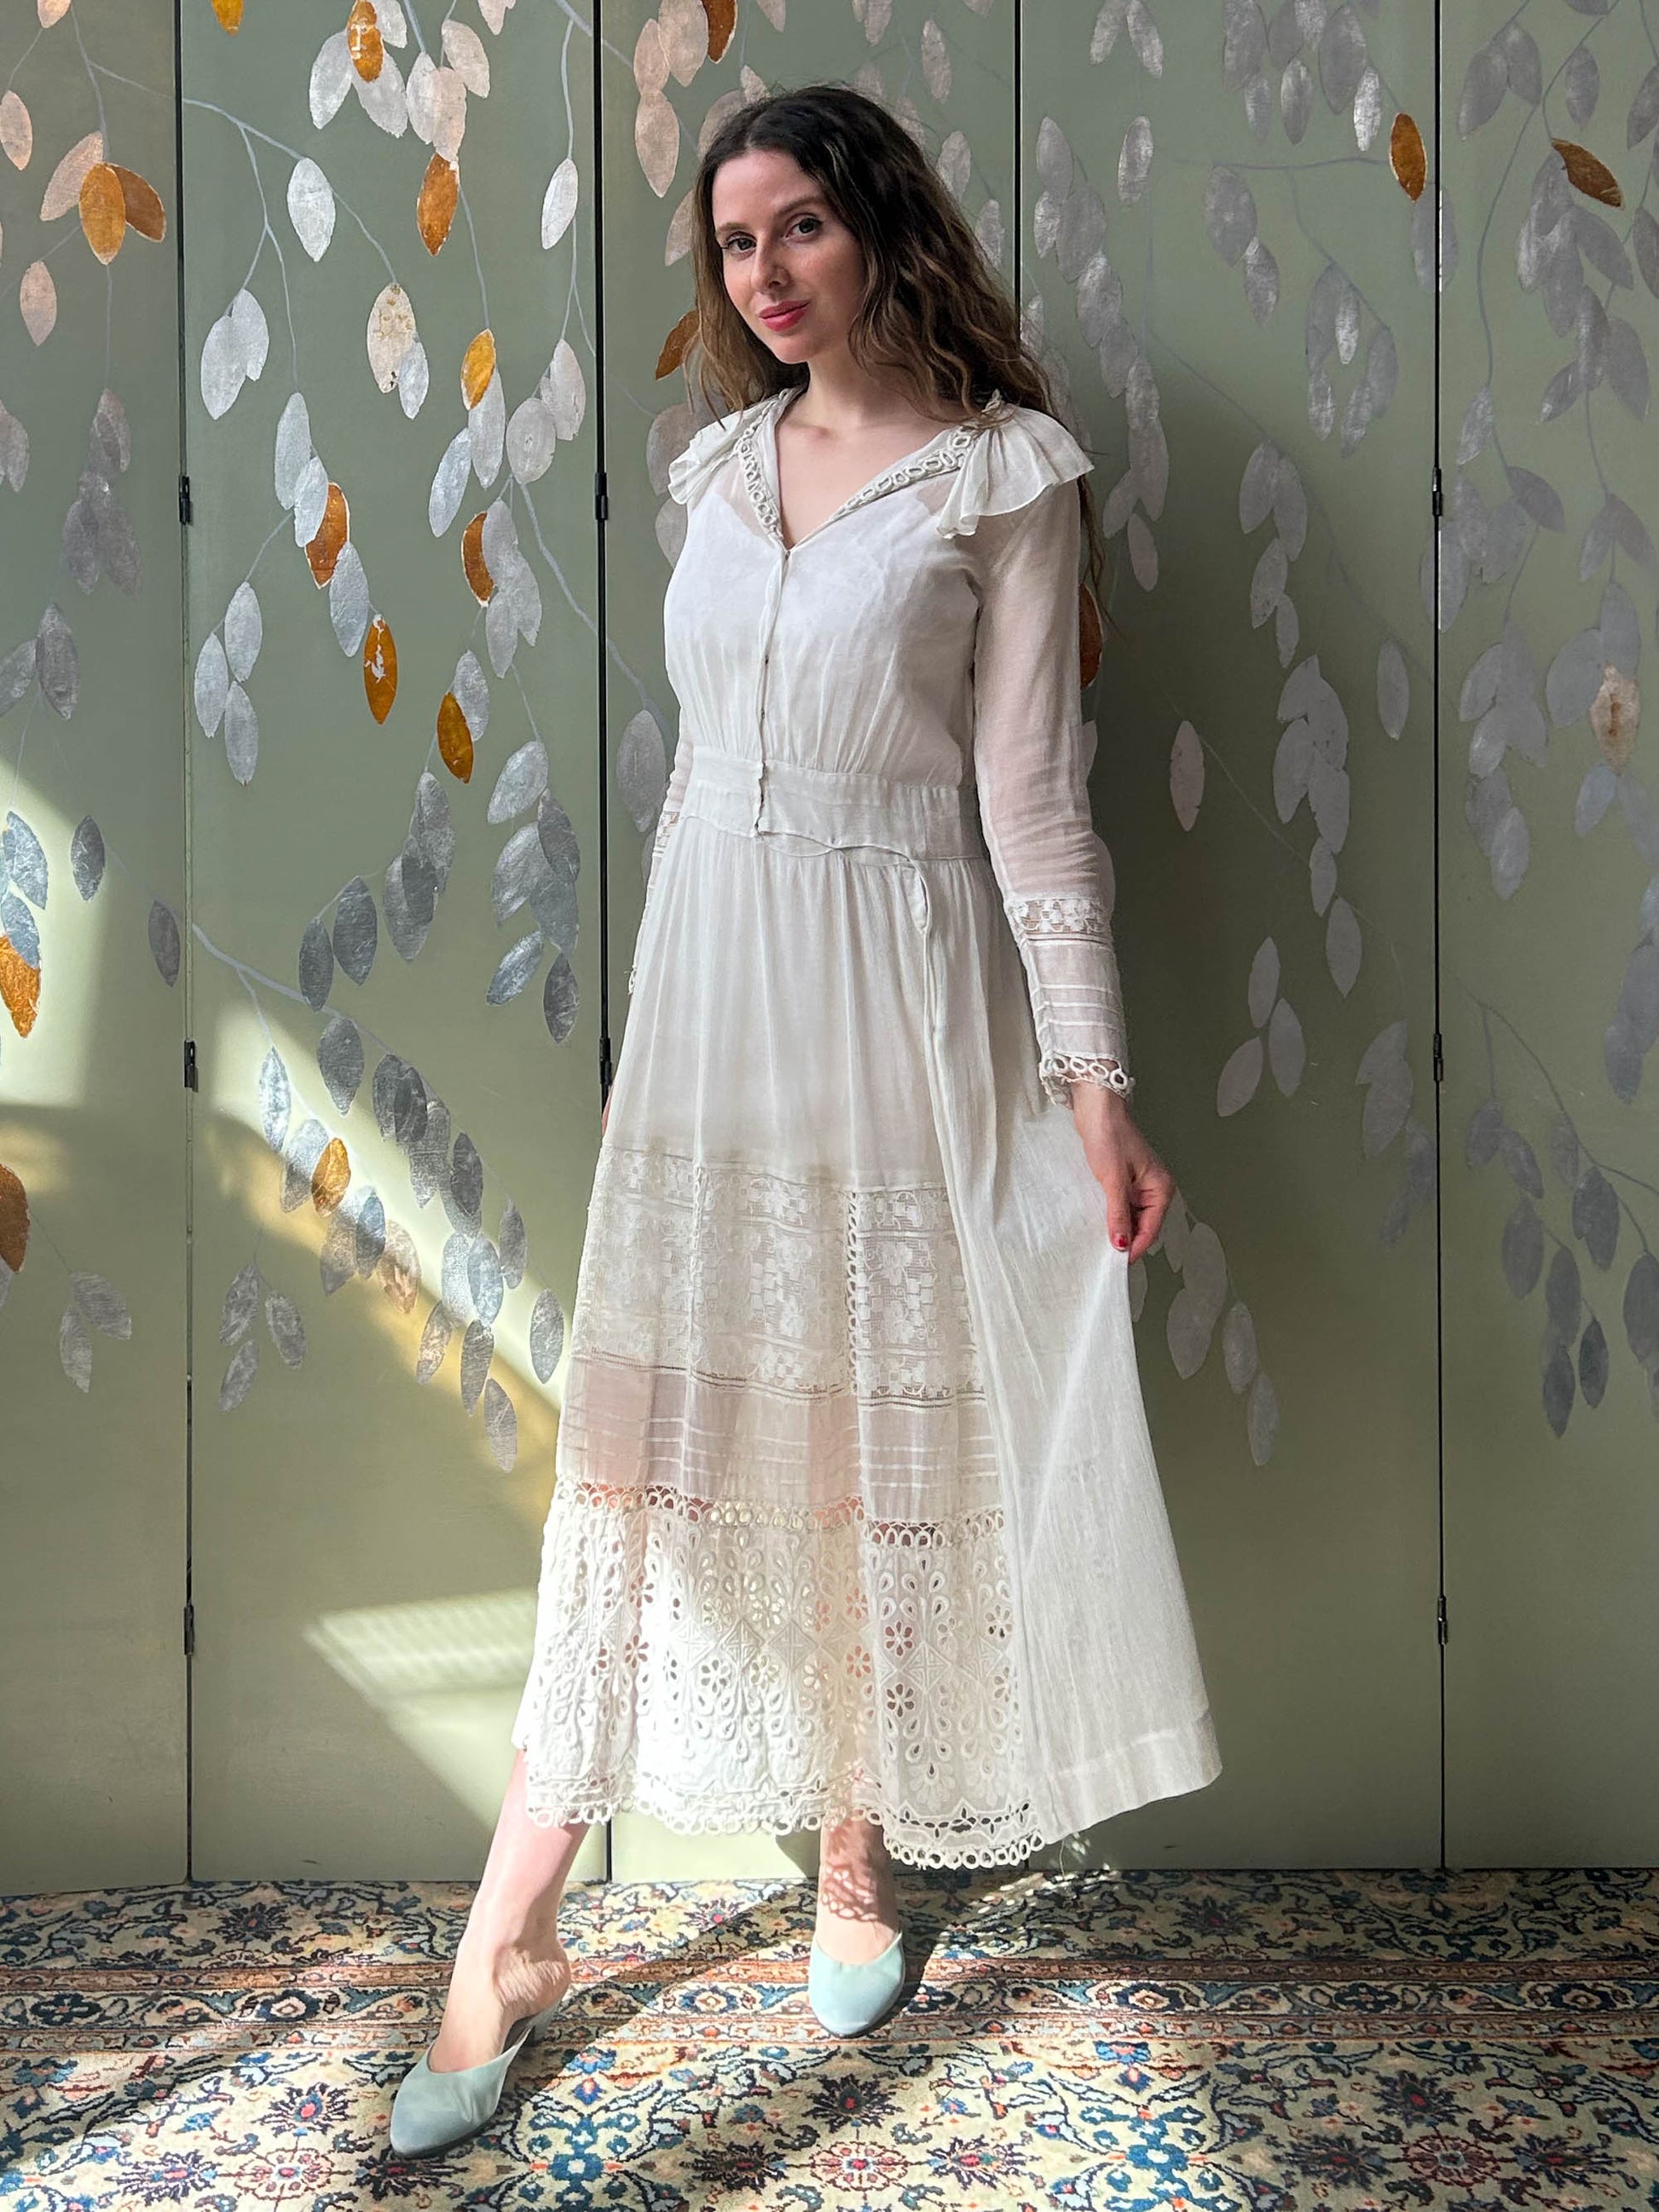 Antique Edwardian White Batiste Cotton Gauze Lawn Dress with Ruffle Collar, Long Sleeves, Lace and Embroidery, Boho Wedding Dress, Bust 34"